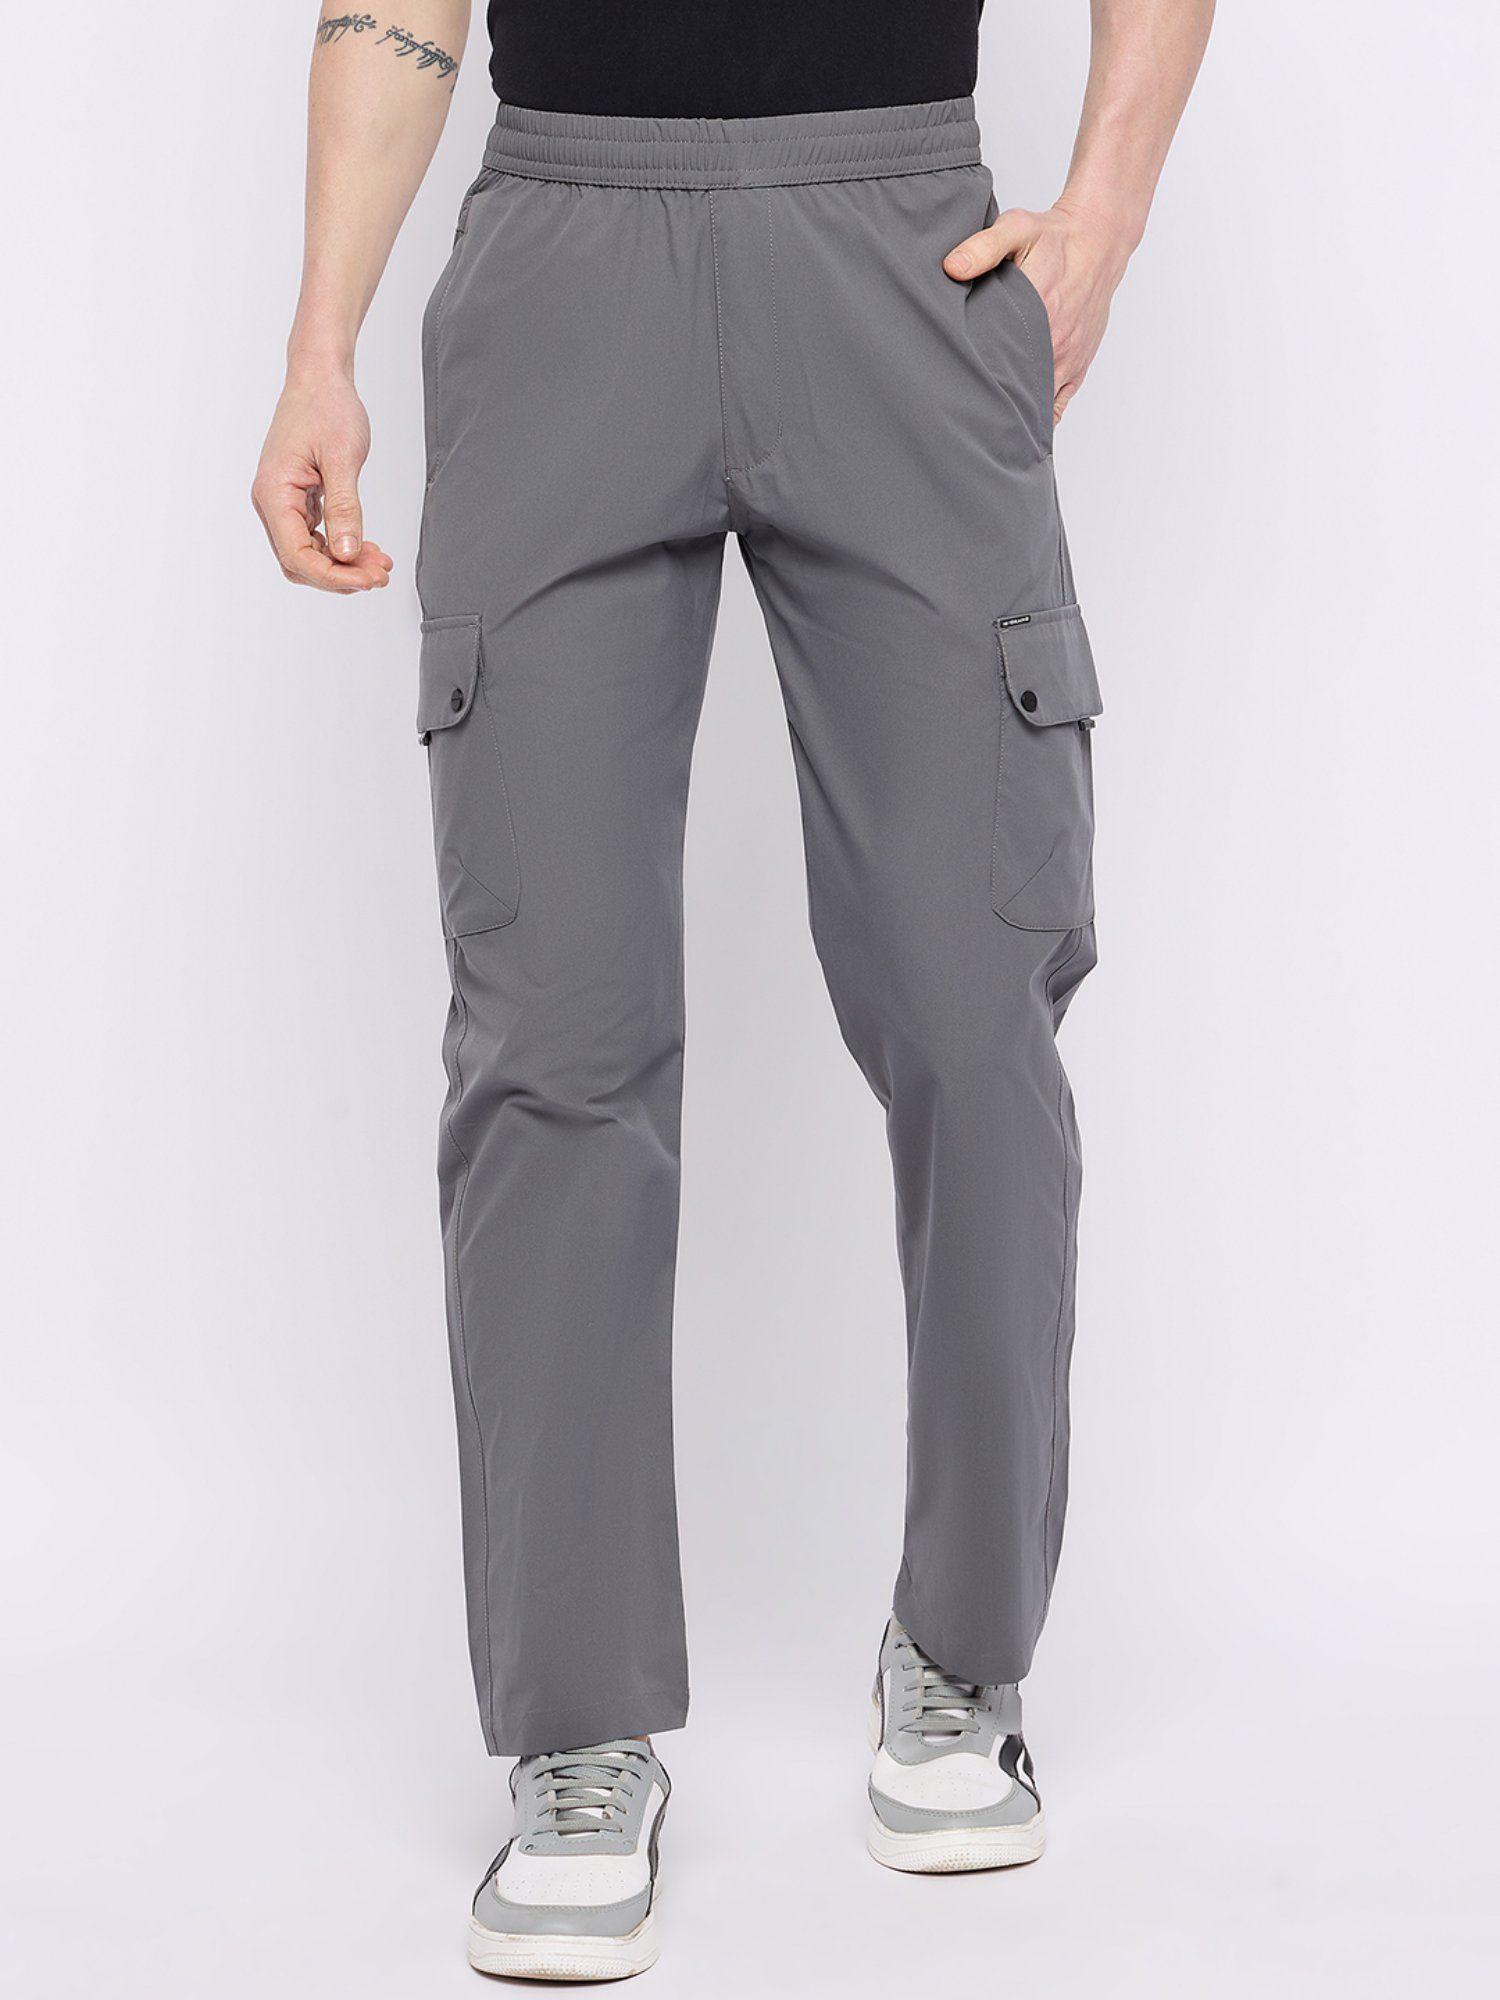 grey polyester track pants